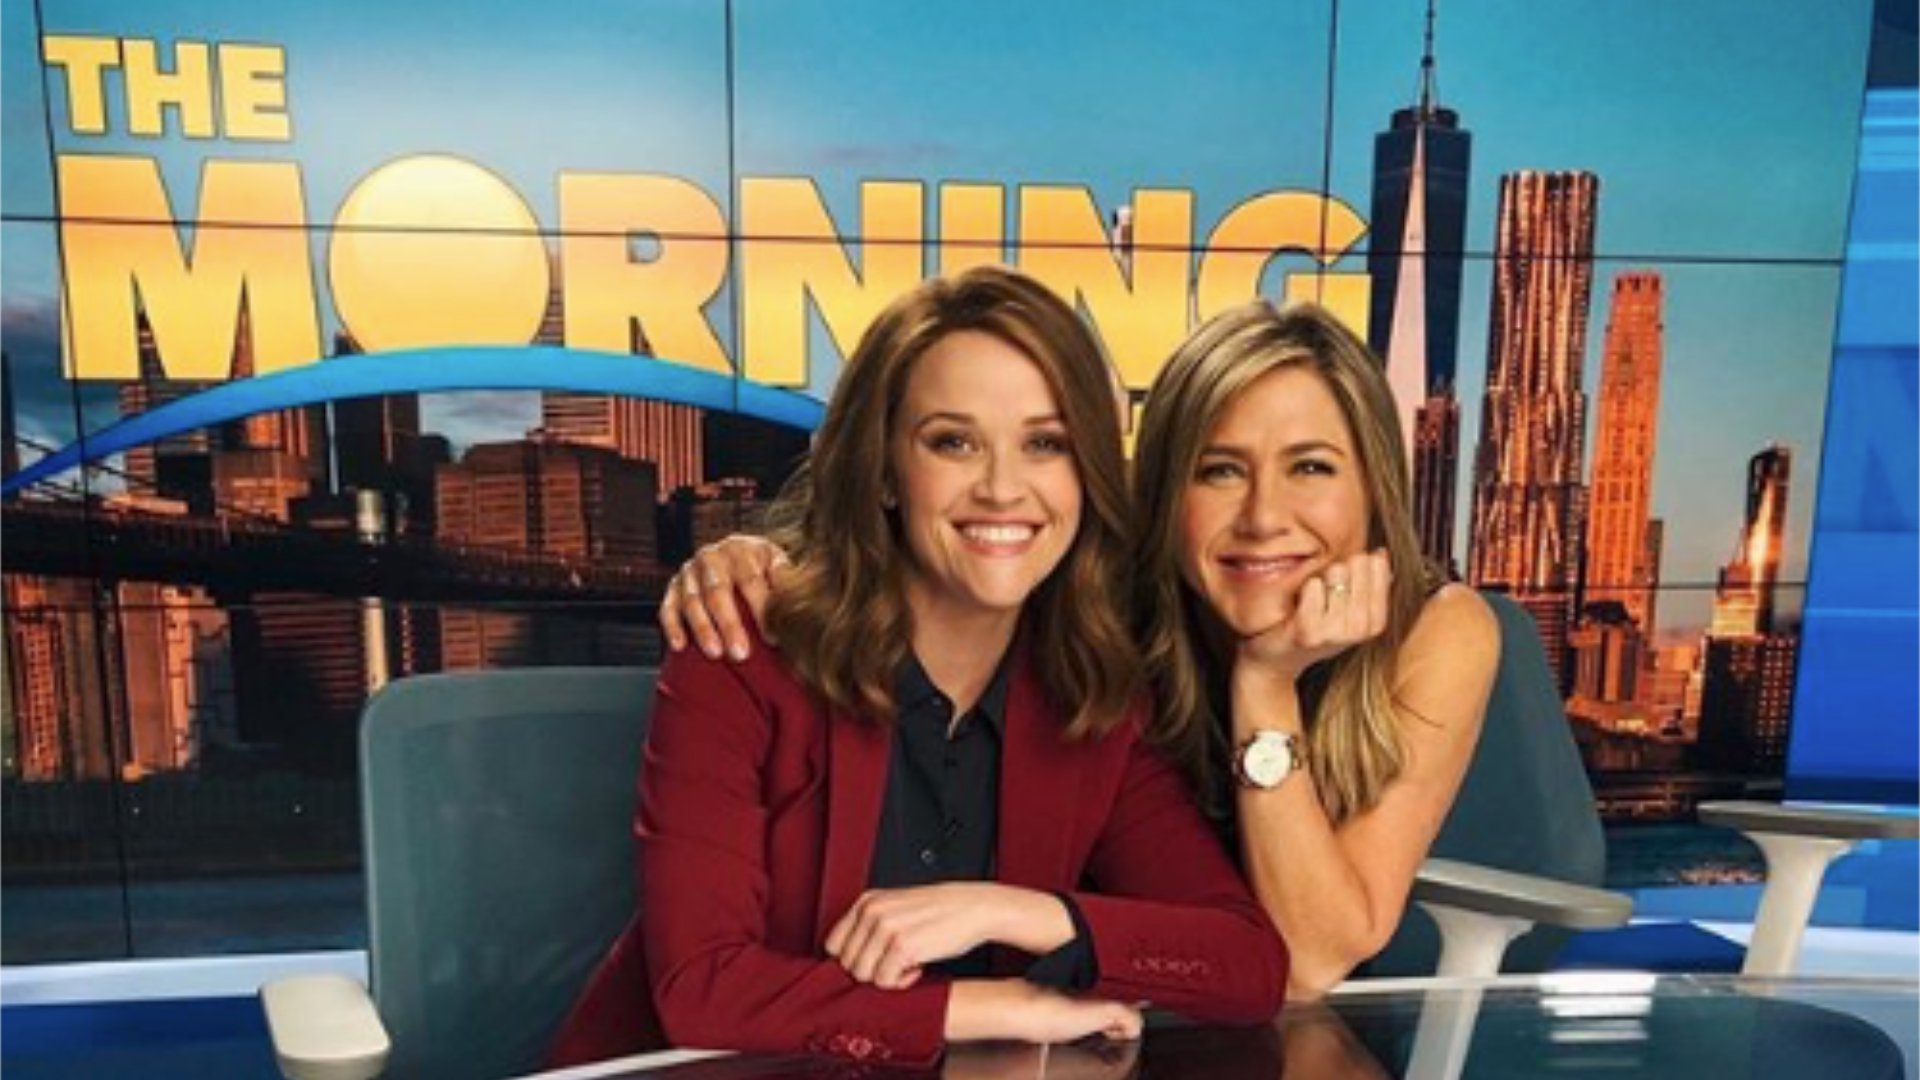 Apple TV+'s THE MORNING SHOW Contains an Excessive Amount of Offensive  Content